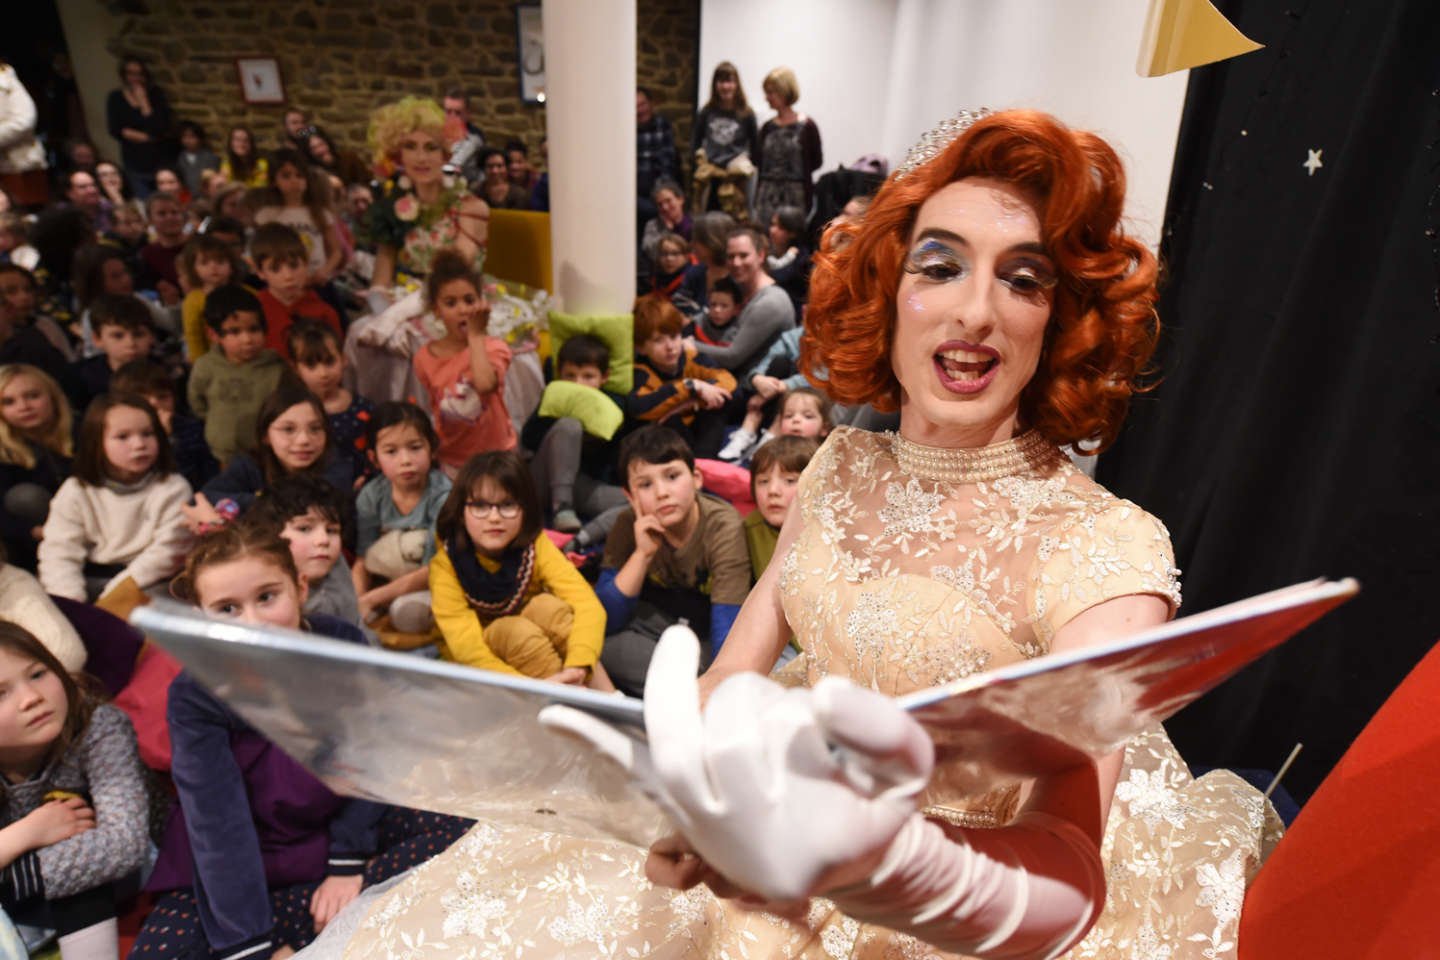 In Brittany, drag culture in the sights of the far right